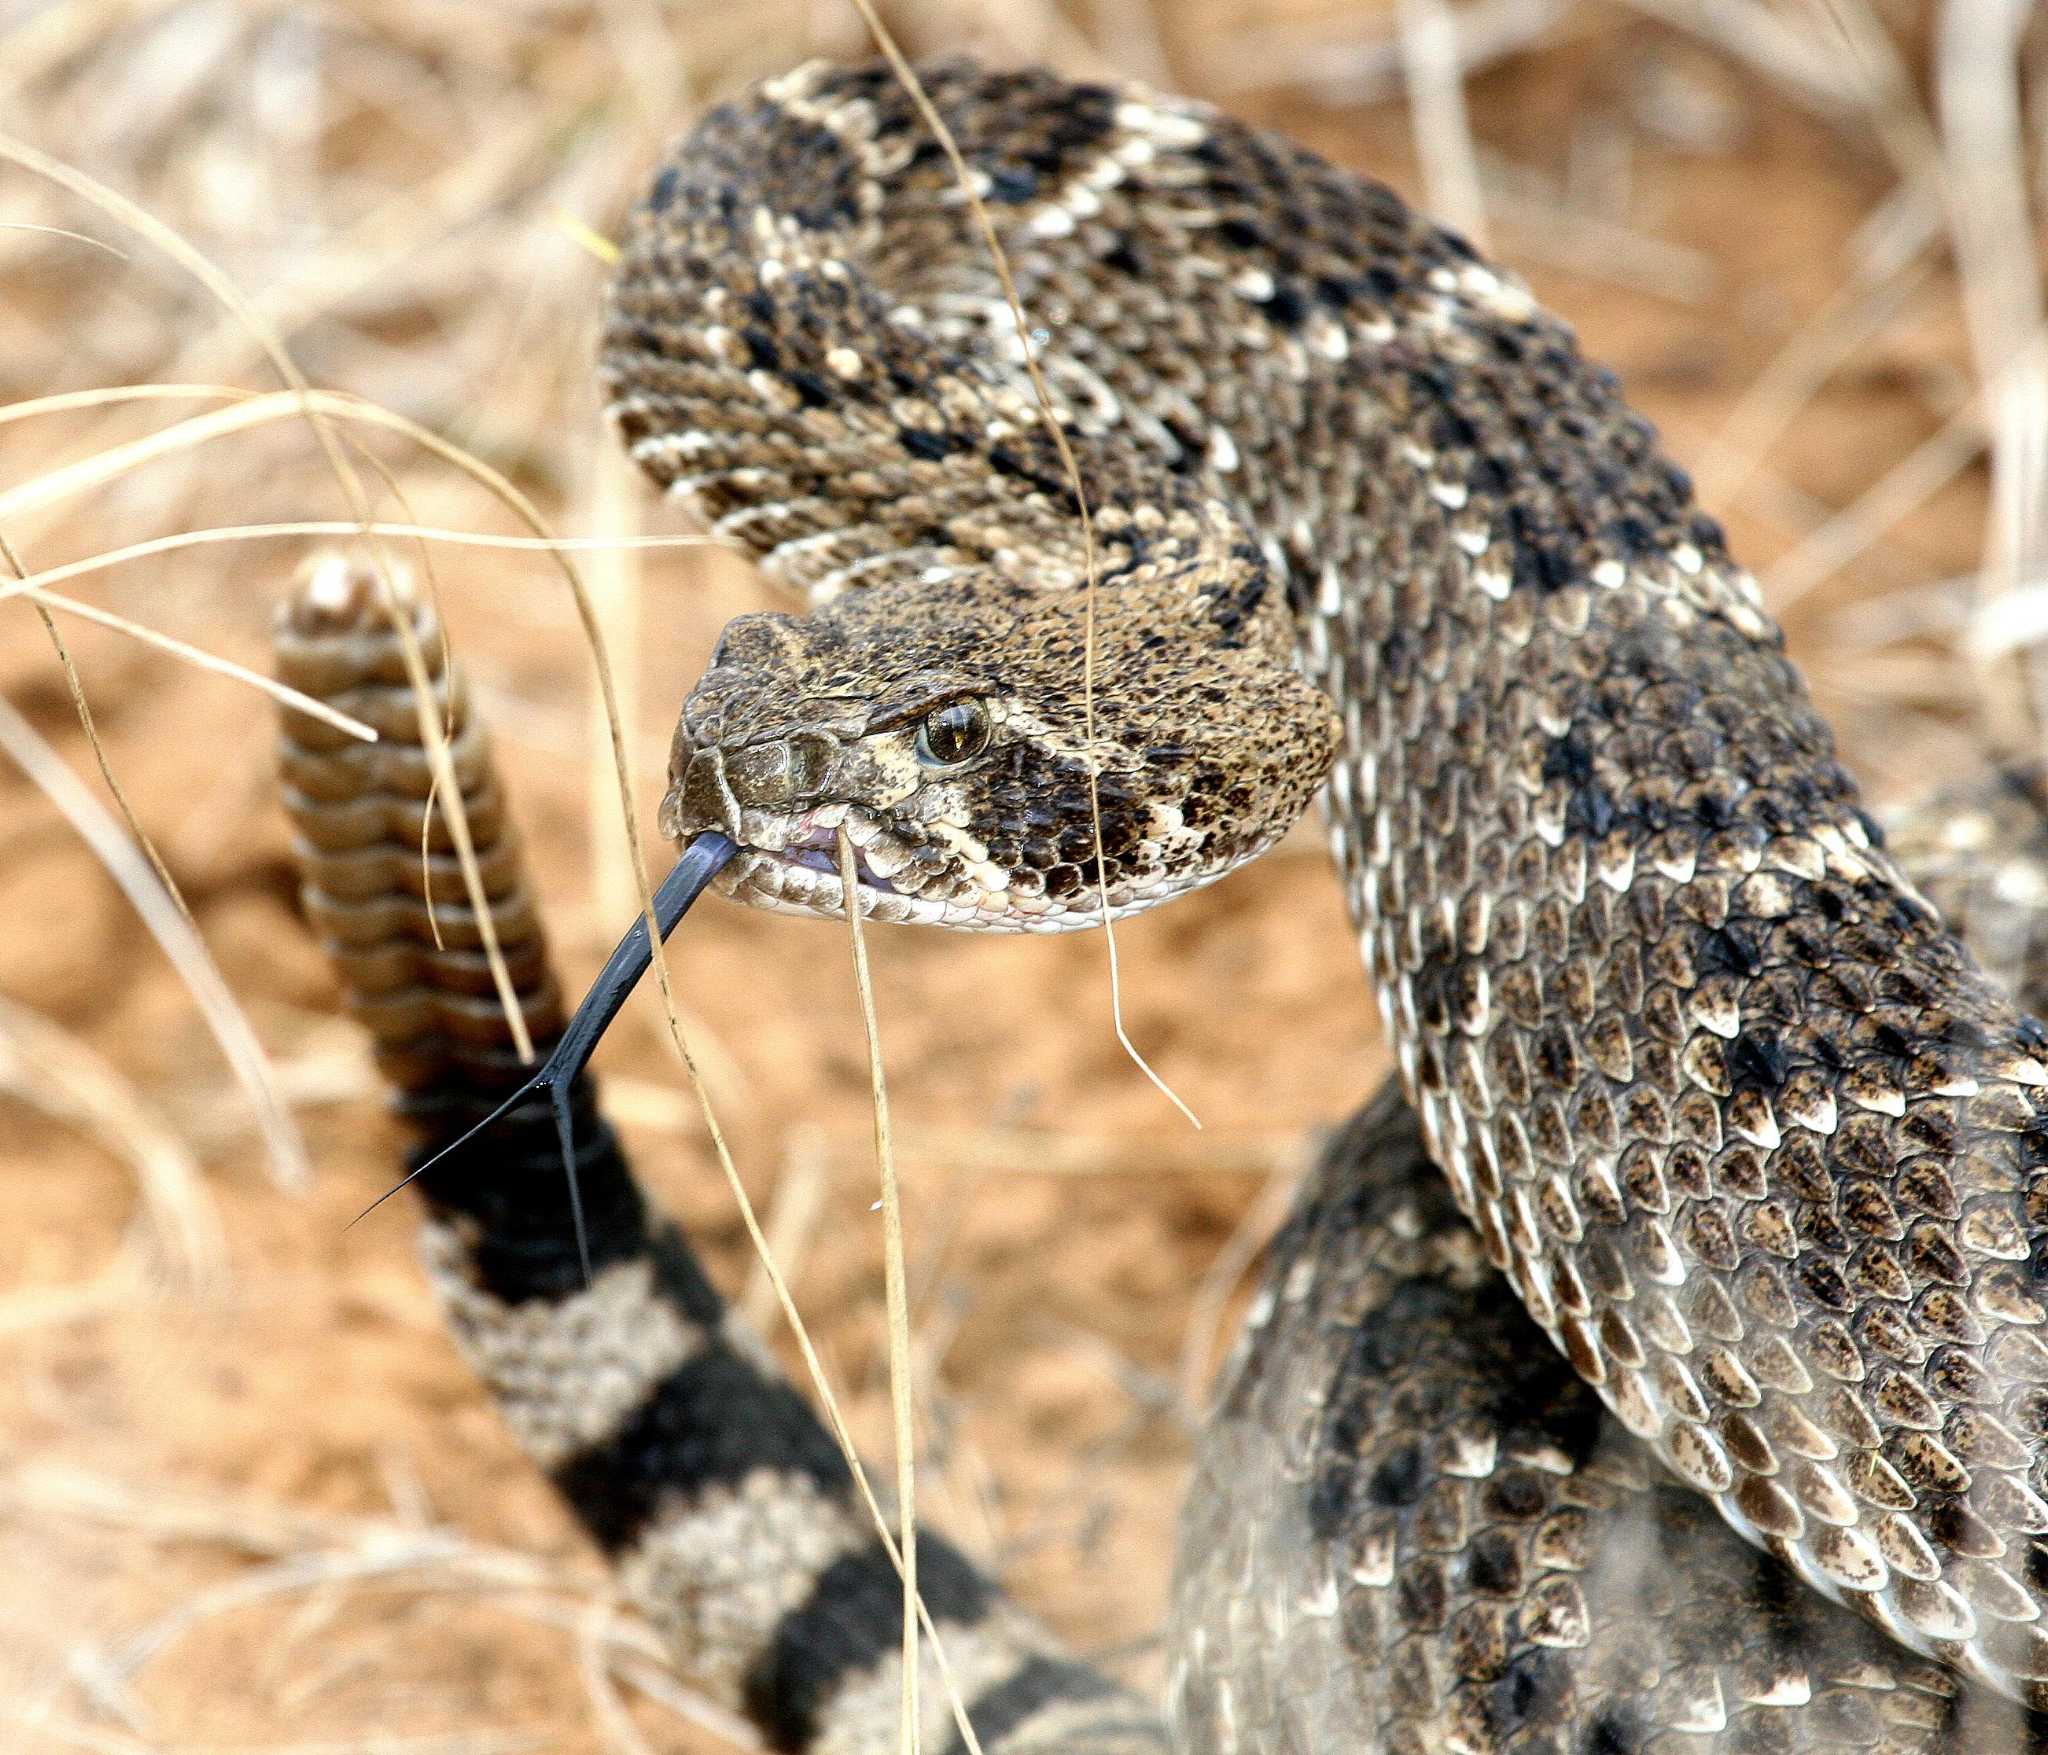 Are Rattlesnakes in Texas?